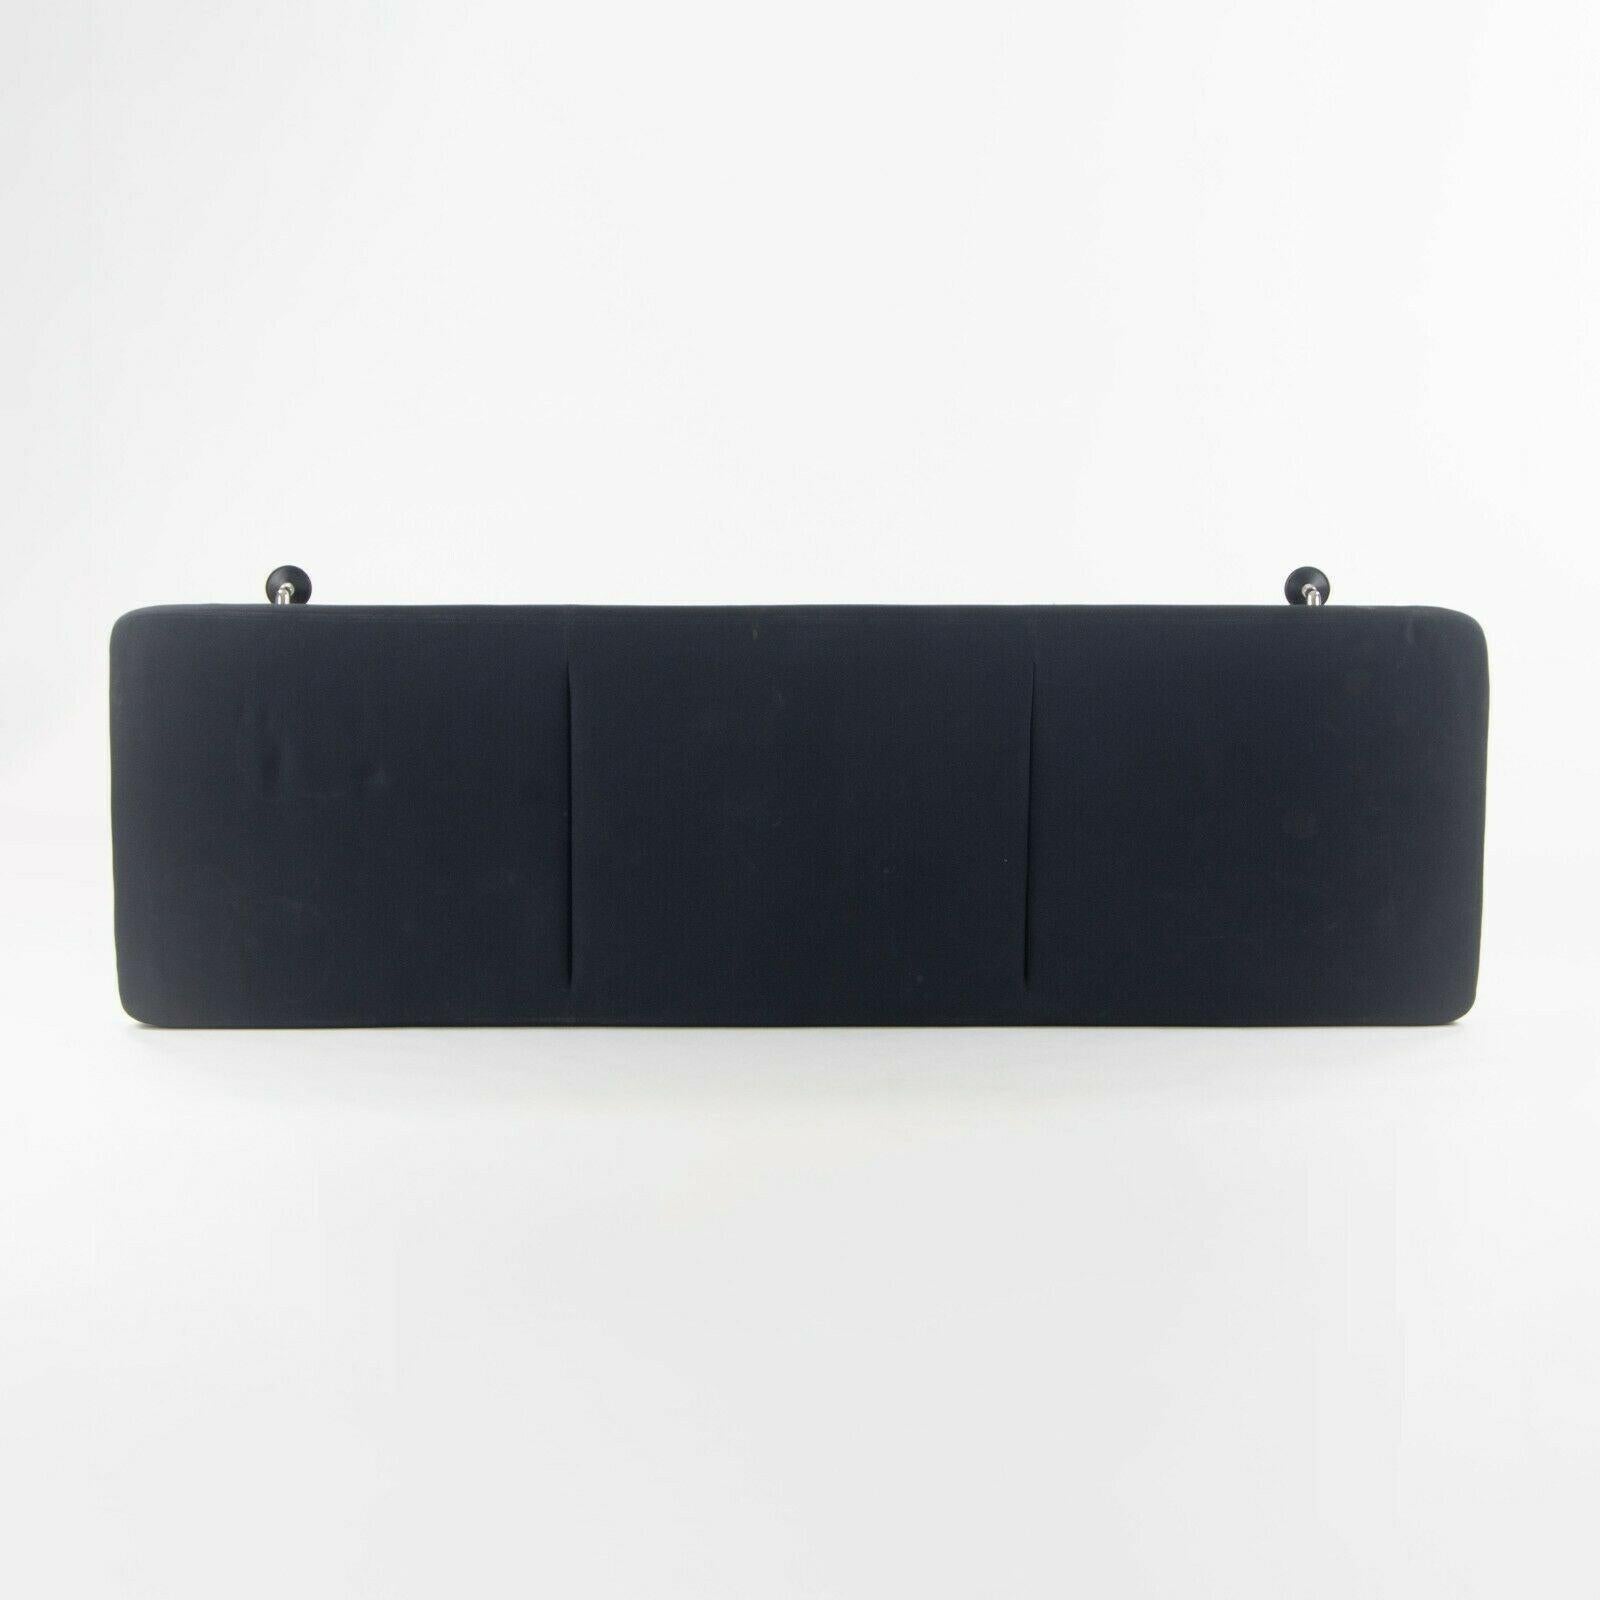 1989 Antonio Citterio for Vitra Area Montage Daybed Bench Sofa w/ Black Fabric In Good Condition For Sale In Philadelphia, PA